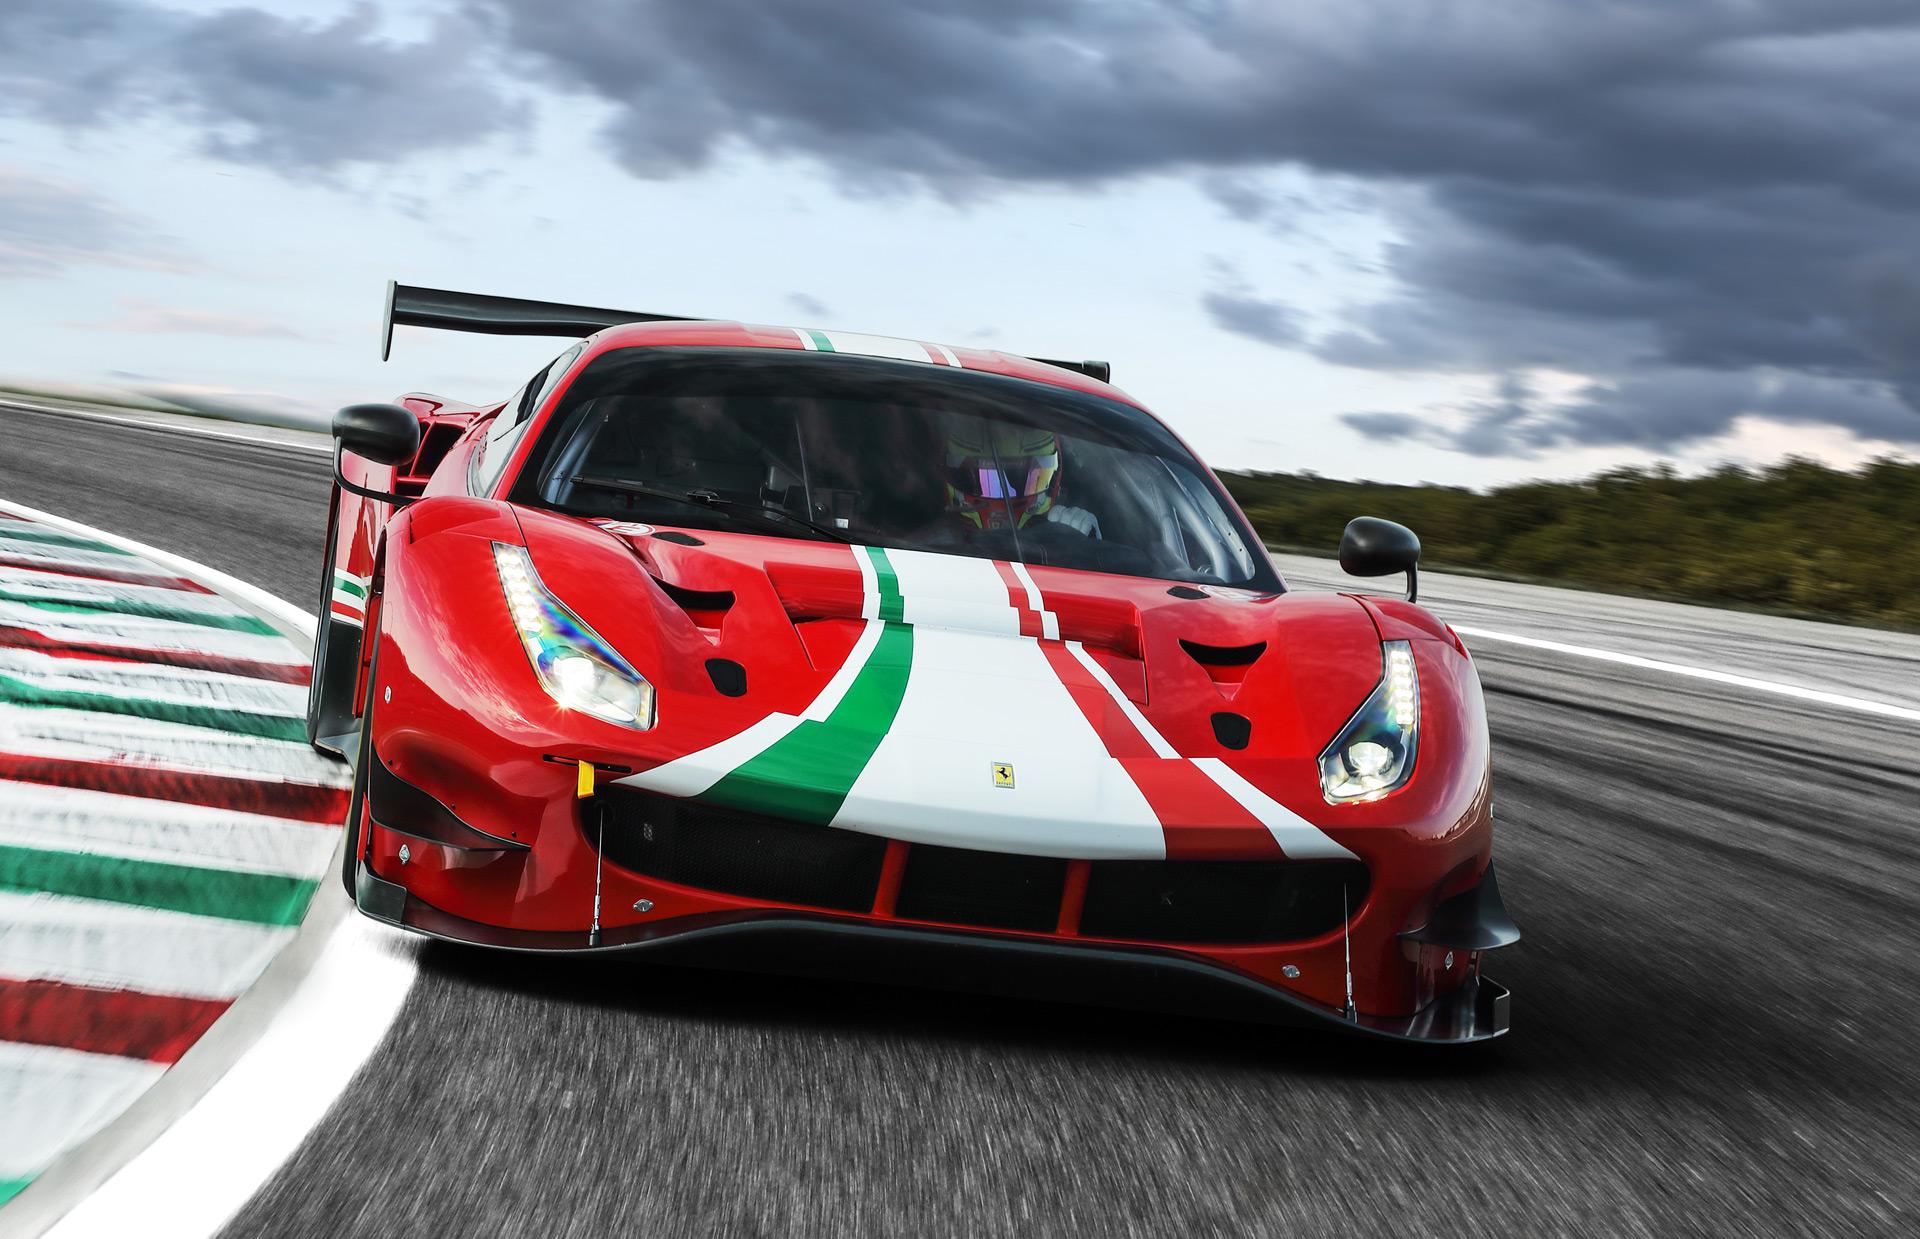 The 2020 Ferrari 488 GT3 Evo Is Ready for Action. News